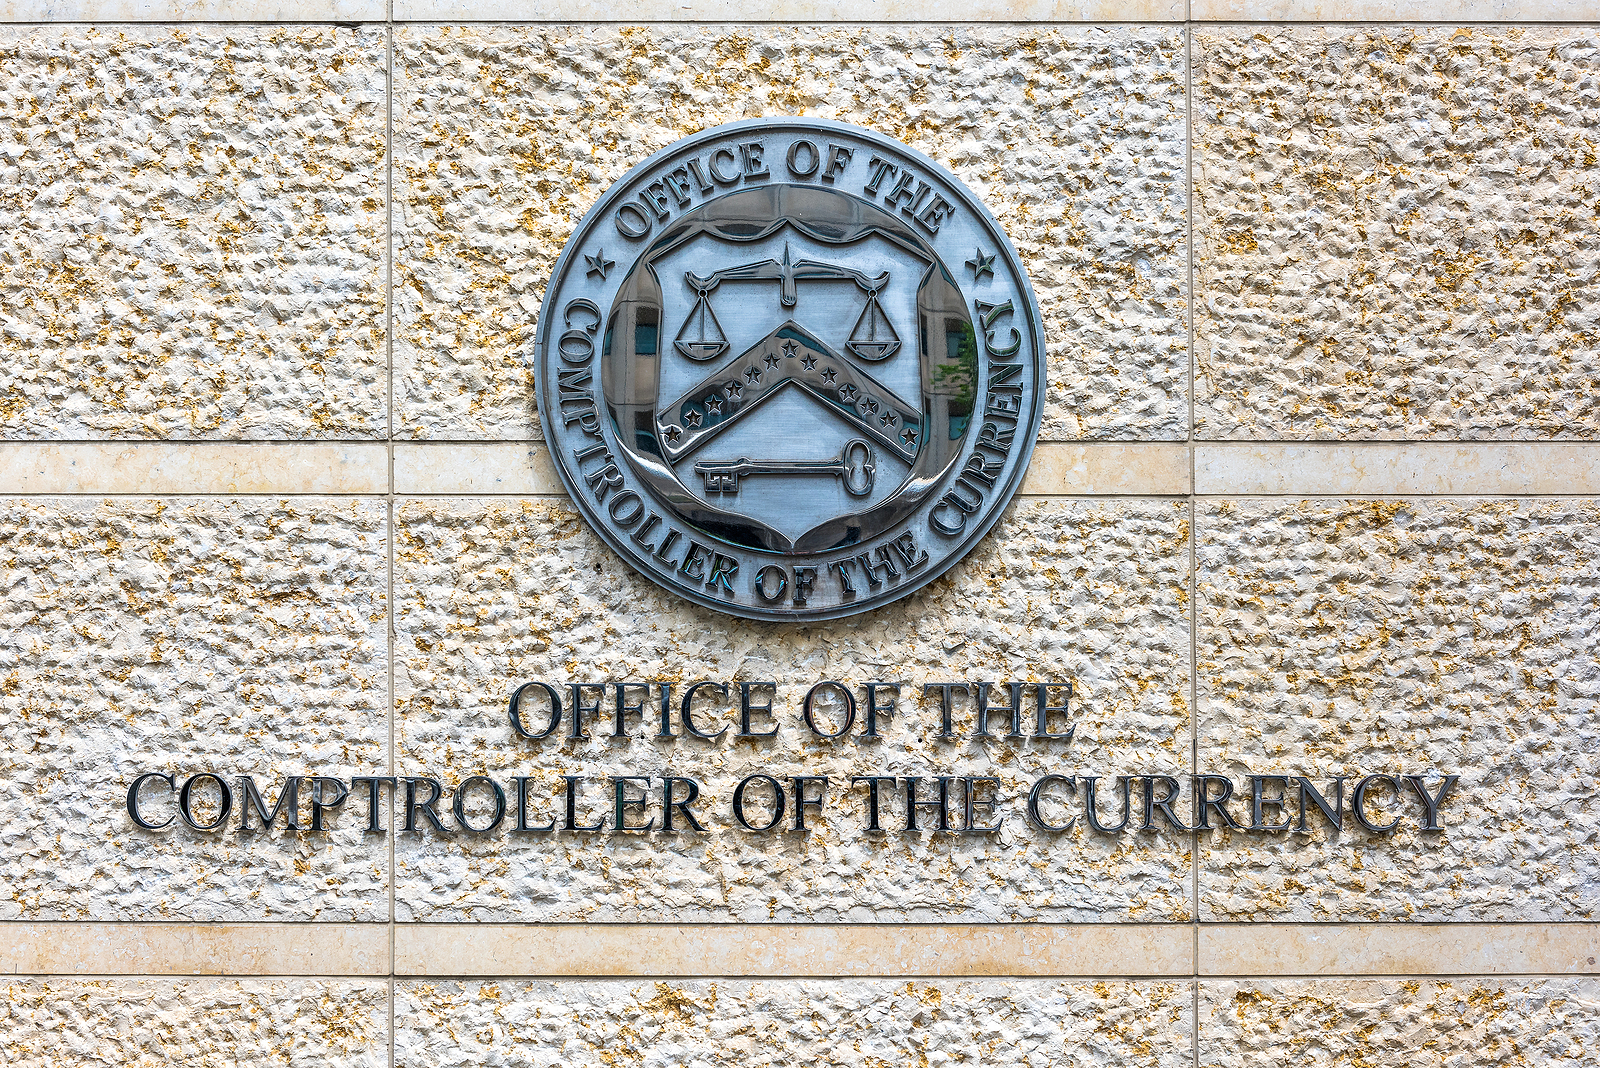 OCC CRA Evaluations for 25 National Banks